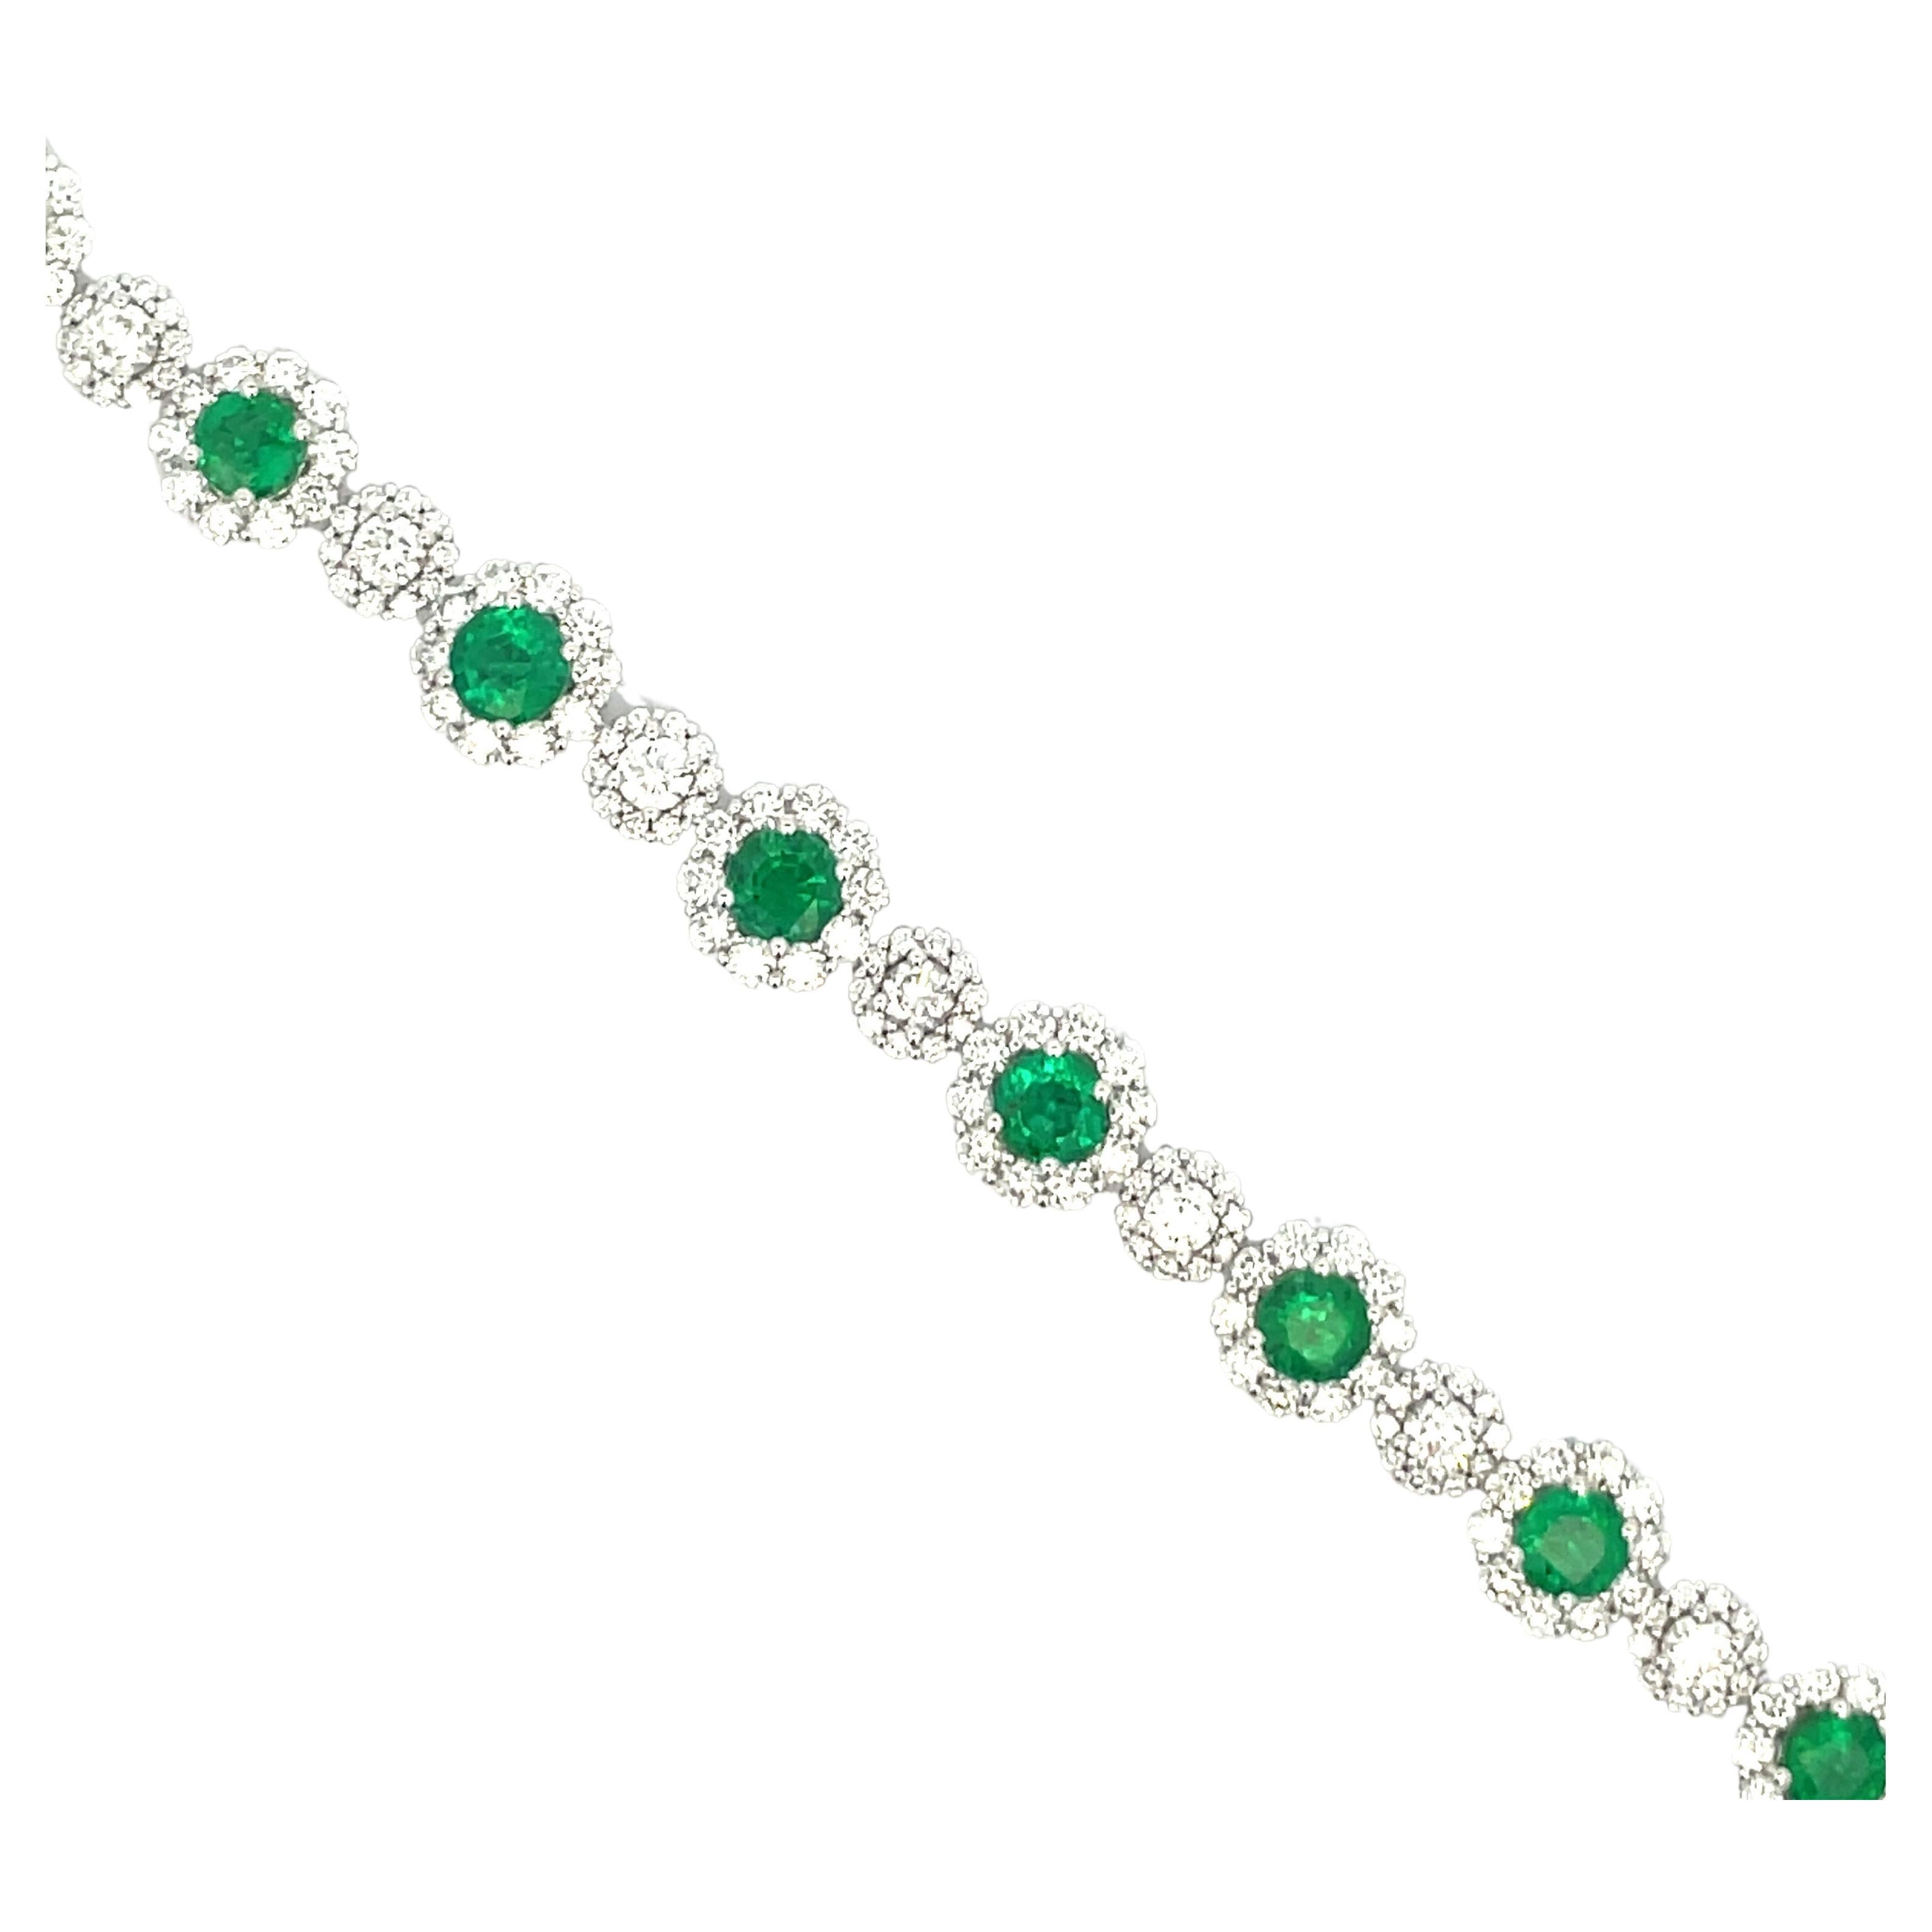 Alternating Emerald and Diamond link bracelet containing 12 Emeralds weighing 5.48 Carats and 254 round brilliants weighing 5.48 carats, in 18 karat white gold. 
Color G-H
Clarity SI